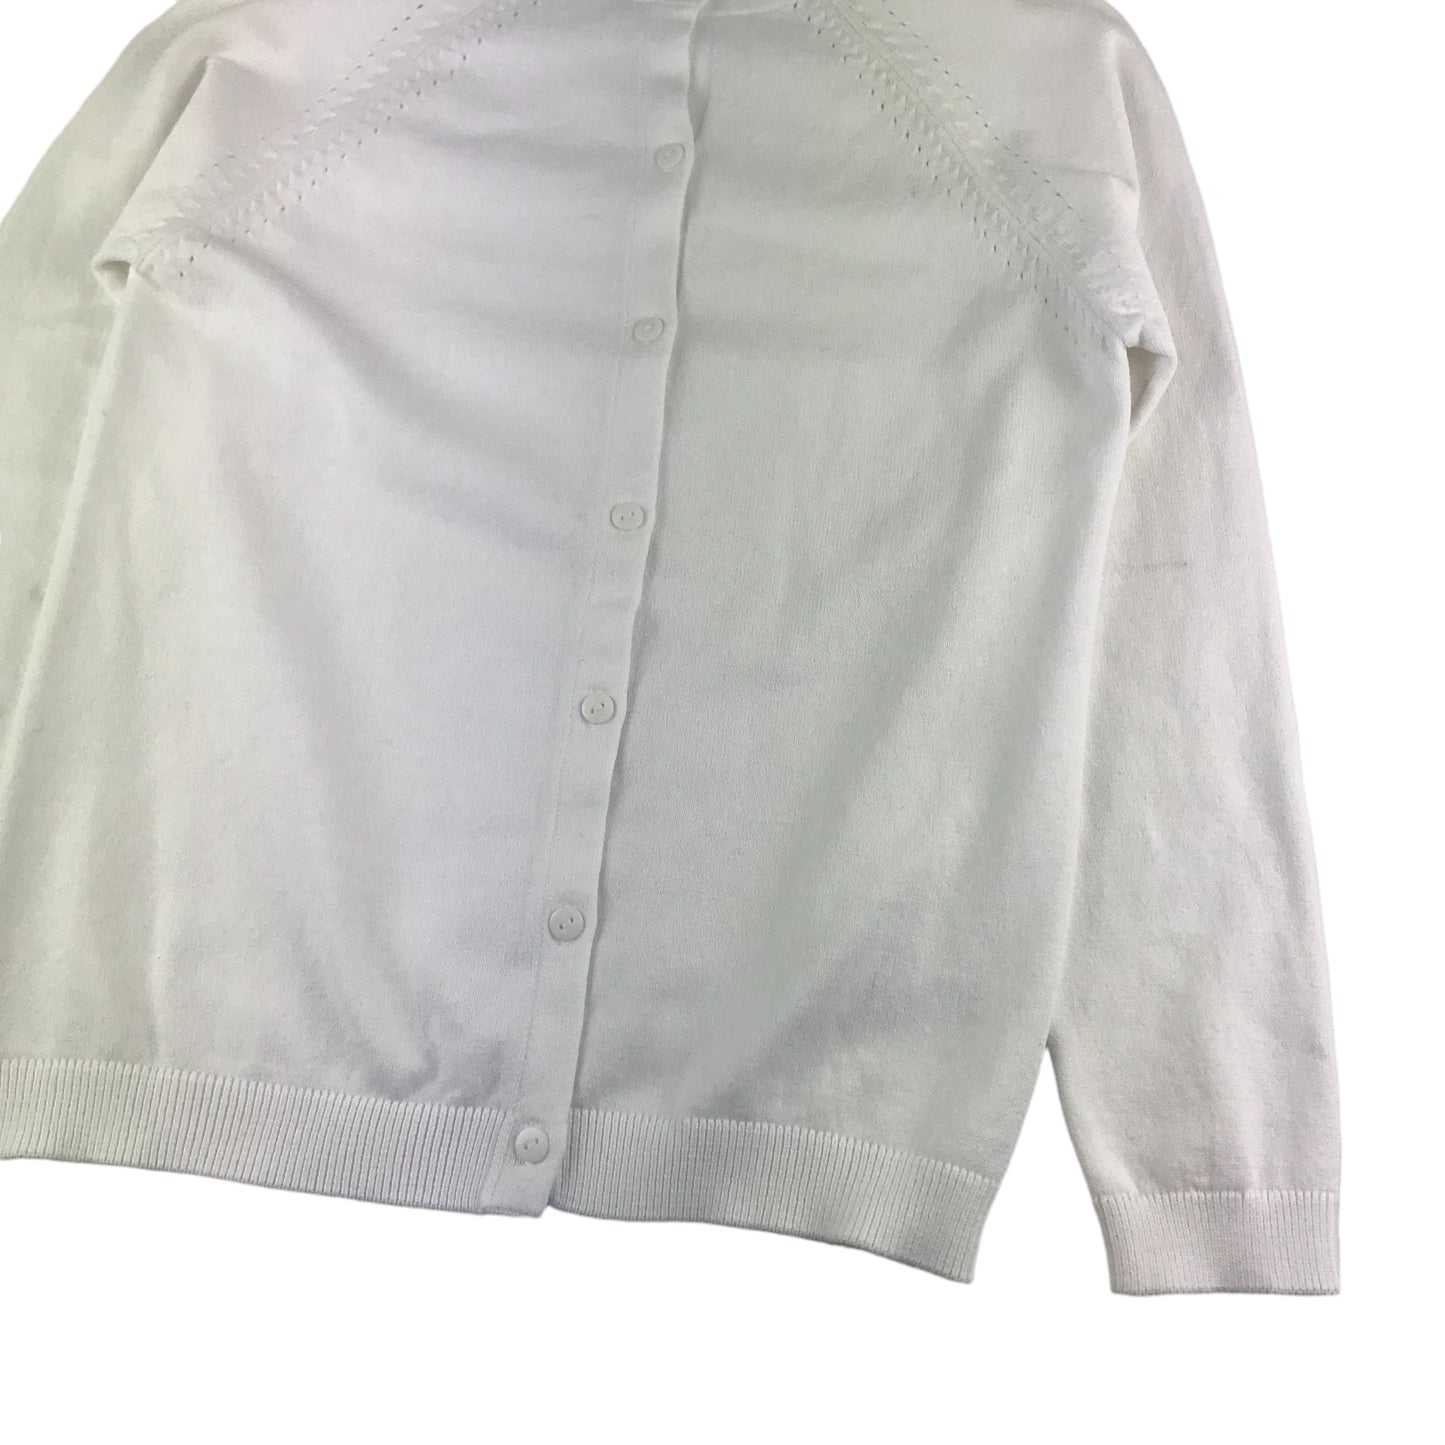 Very Cardigan Age 9 White Plain Button Up